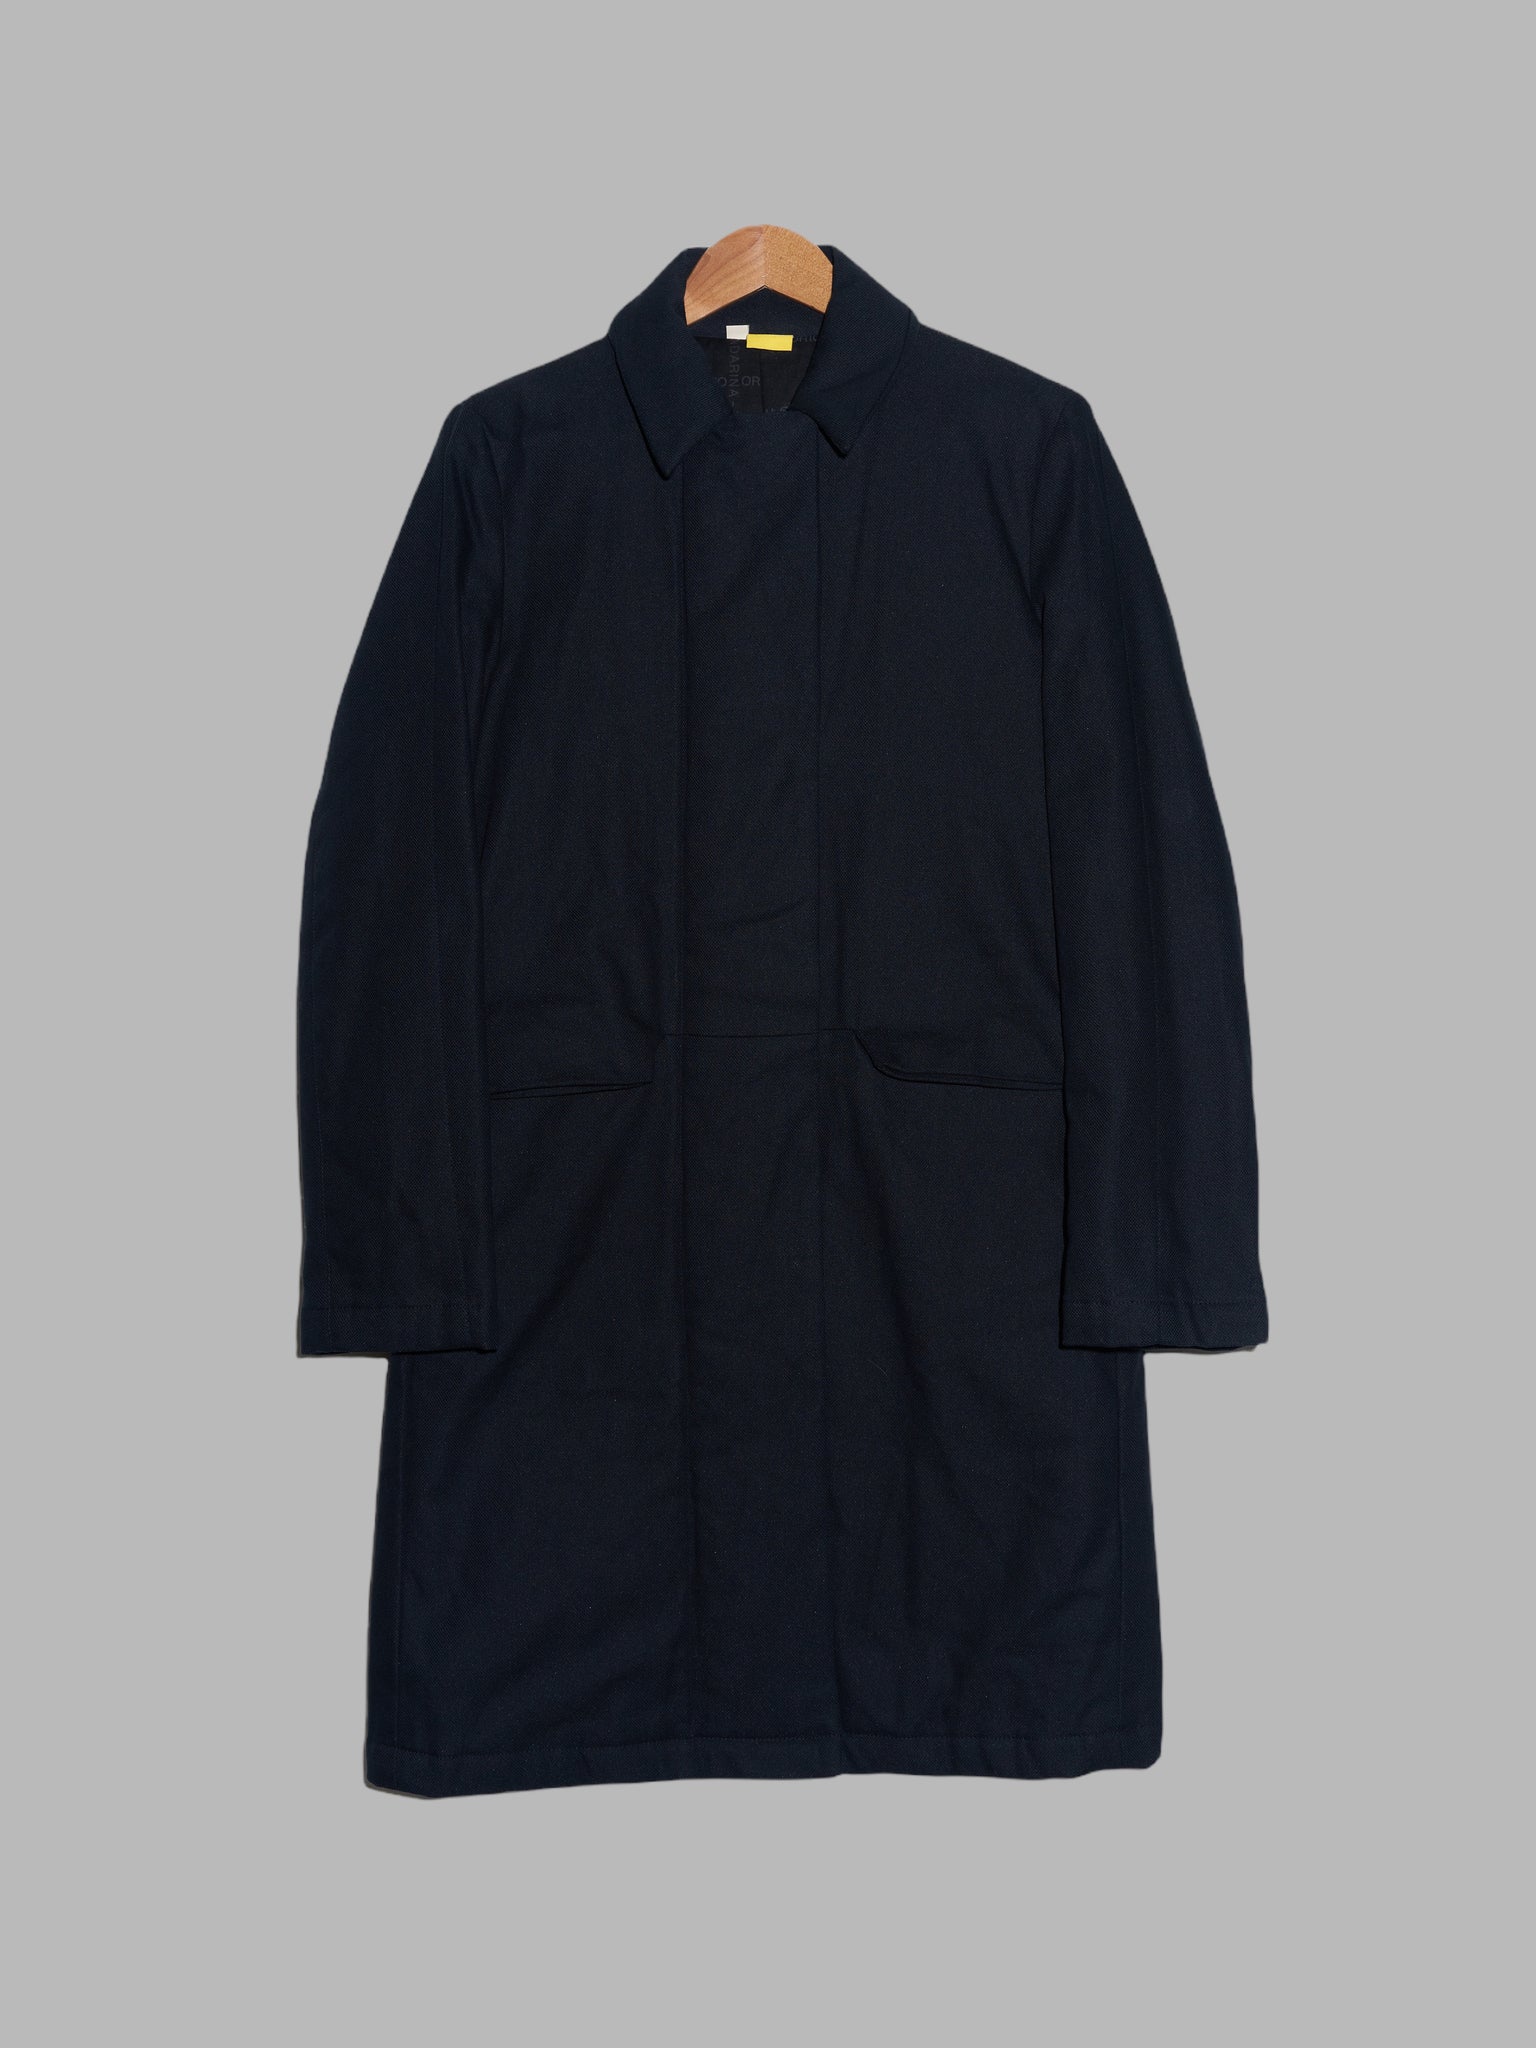 Mandarina Duck black quilted canvas covered placket zip coat - UK size 12